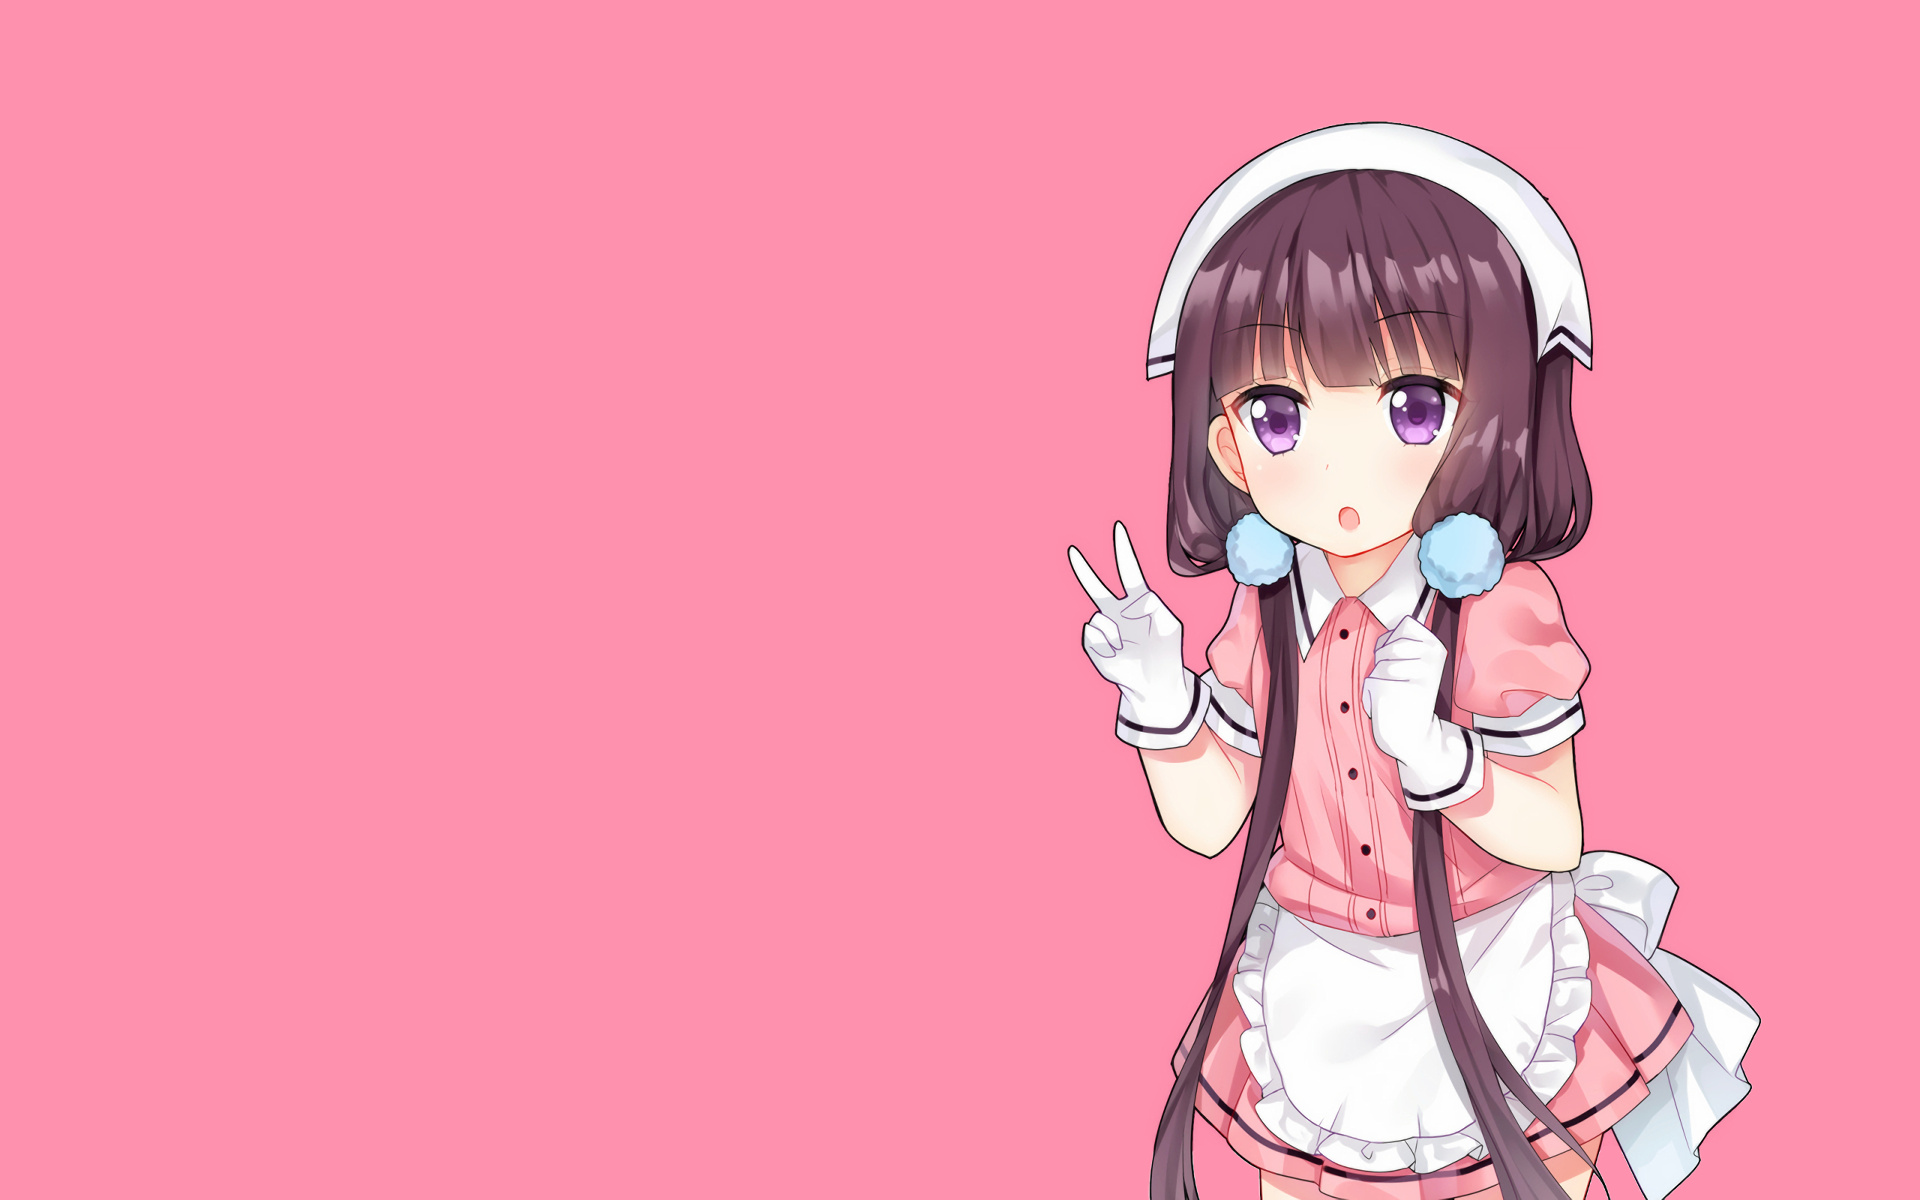 Blend S, HD wallpapers, Background images, Anime, 1920x1200 HD Desktop